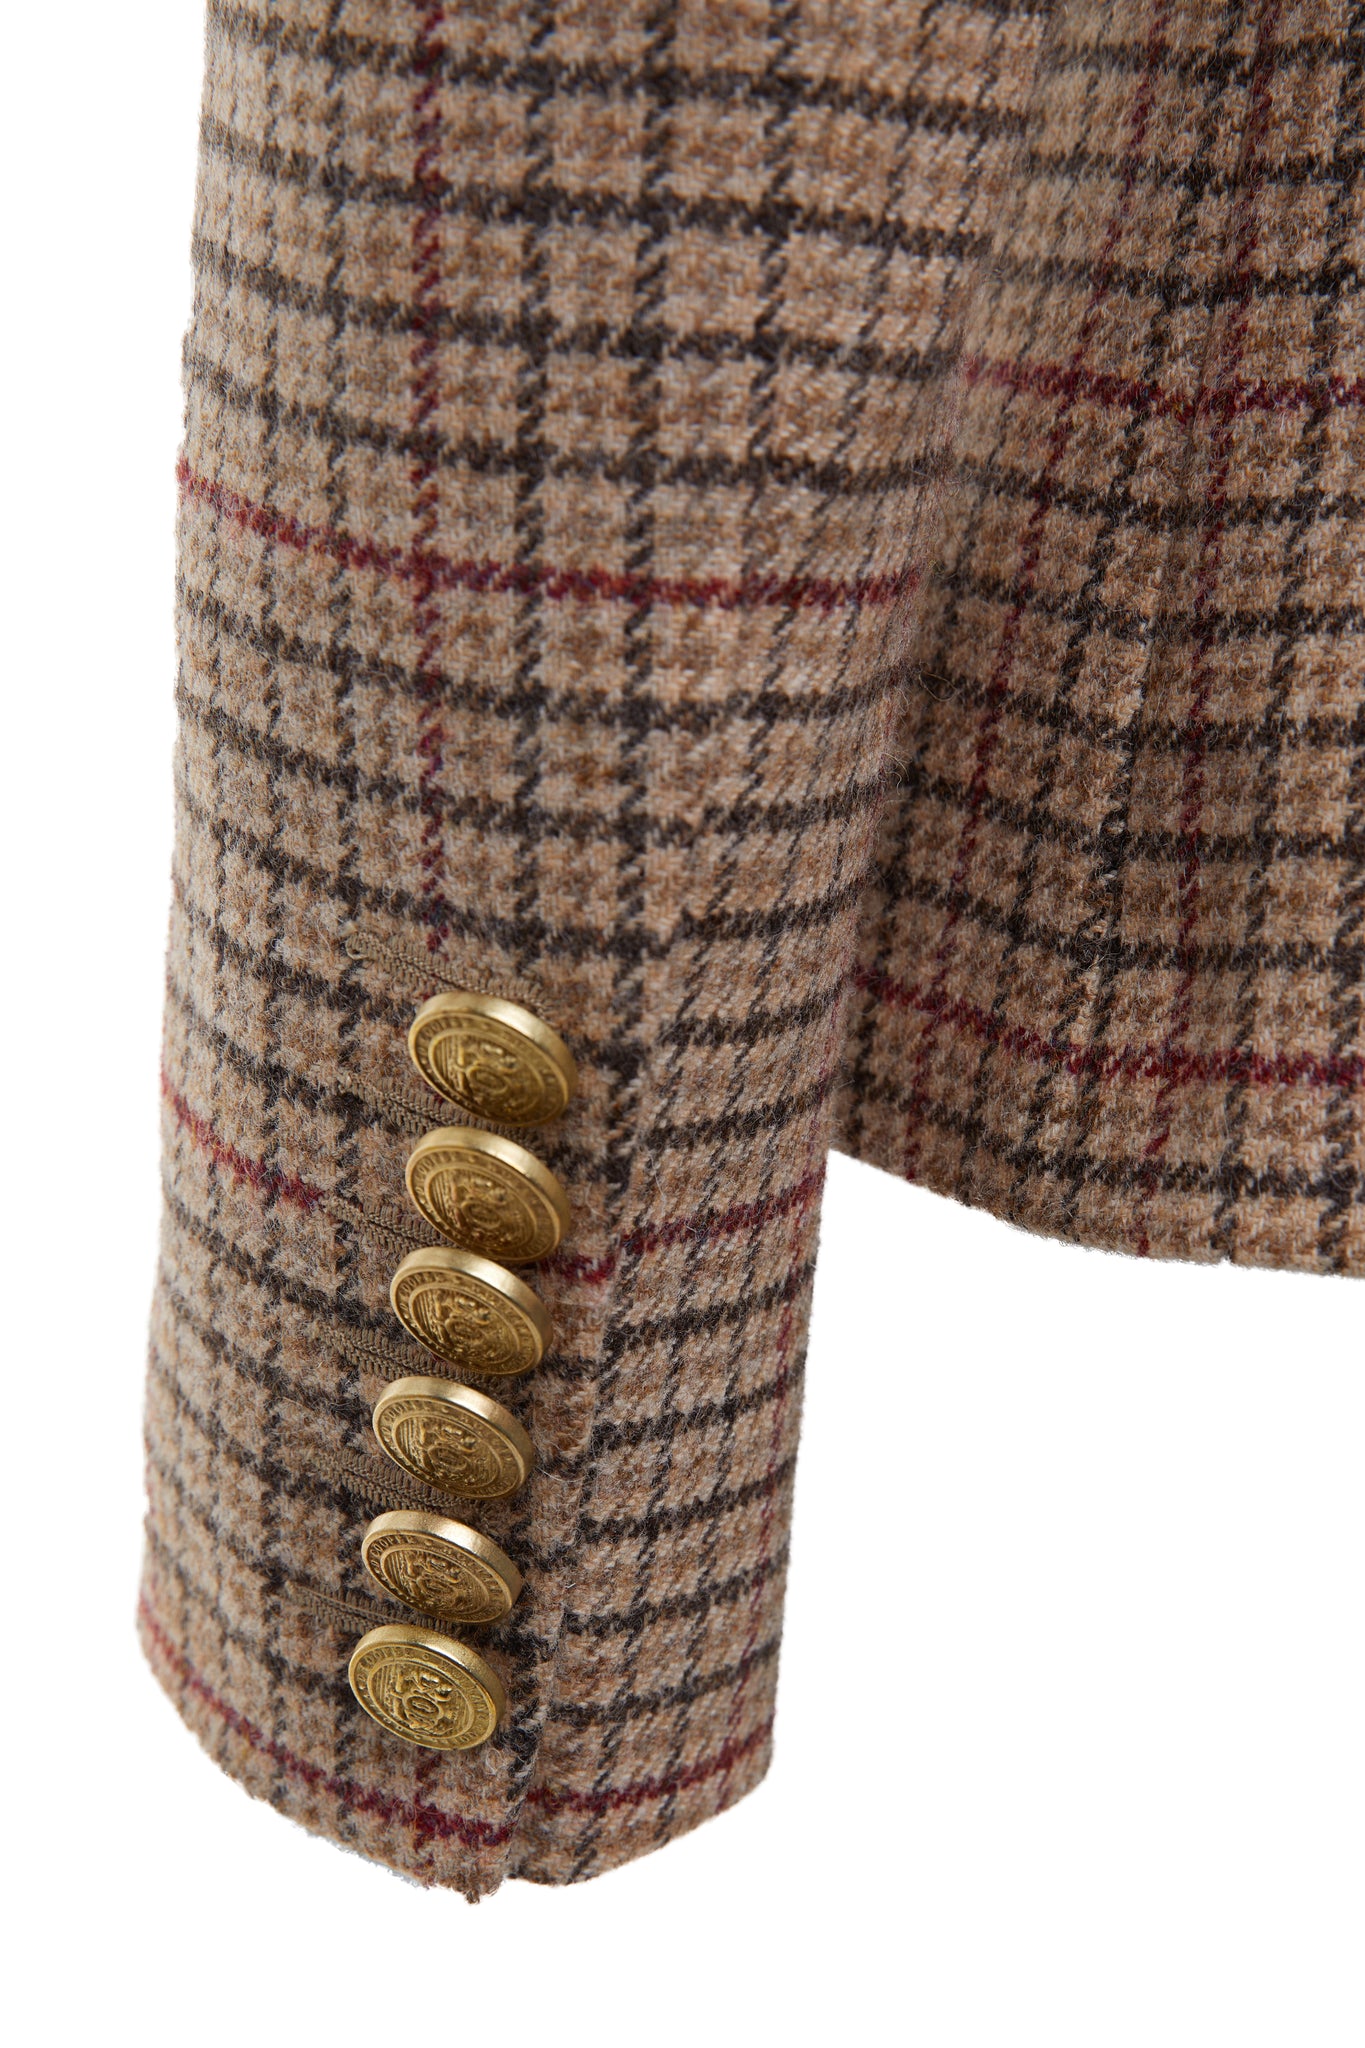 gold button detail on sleeves of British made double breasted blazer that fastens with a single button hole to create a more form fitting silhouette with two pockets and gold button detailing this blazer is made from camel black and red check charlton tweed